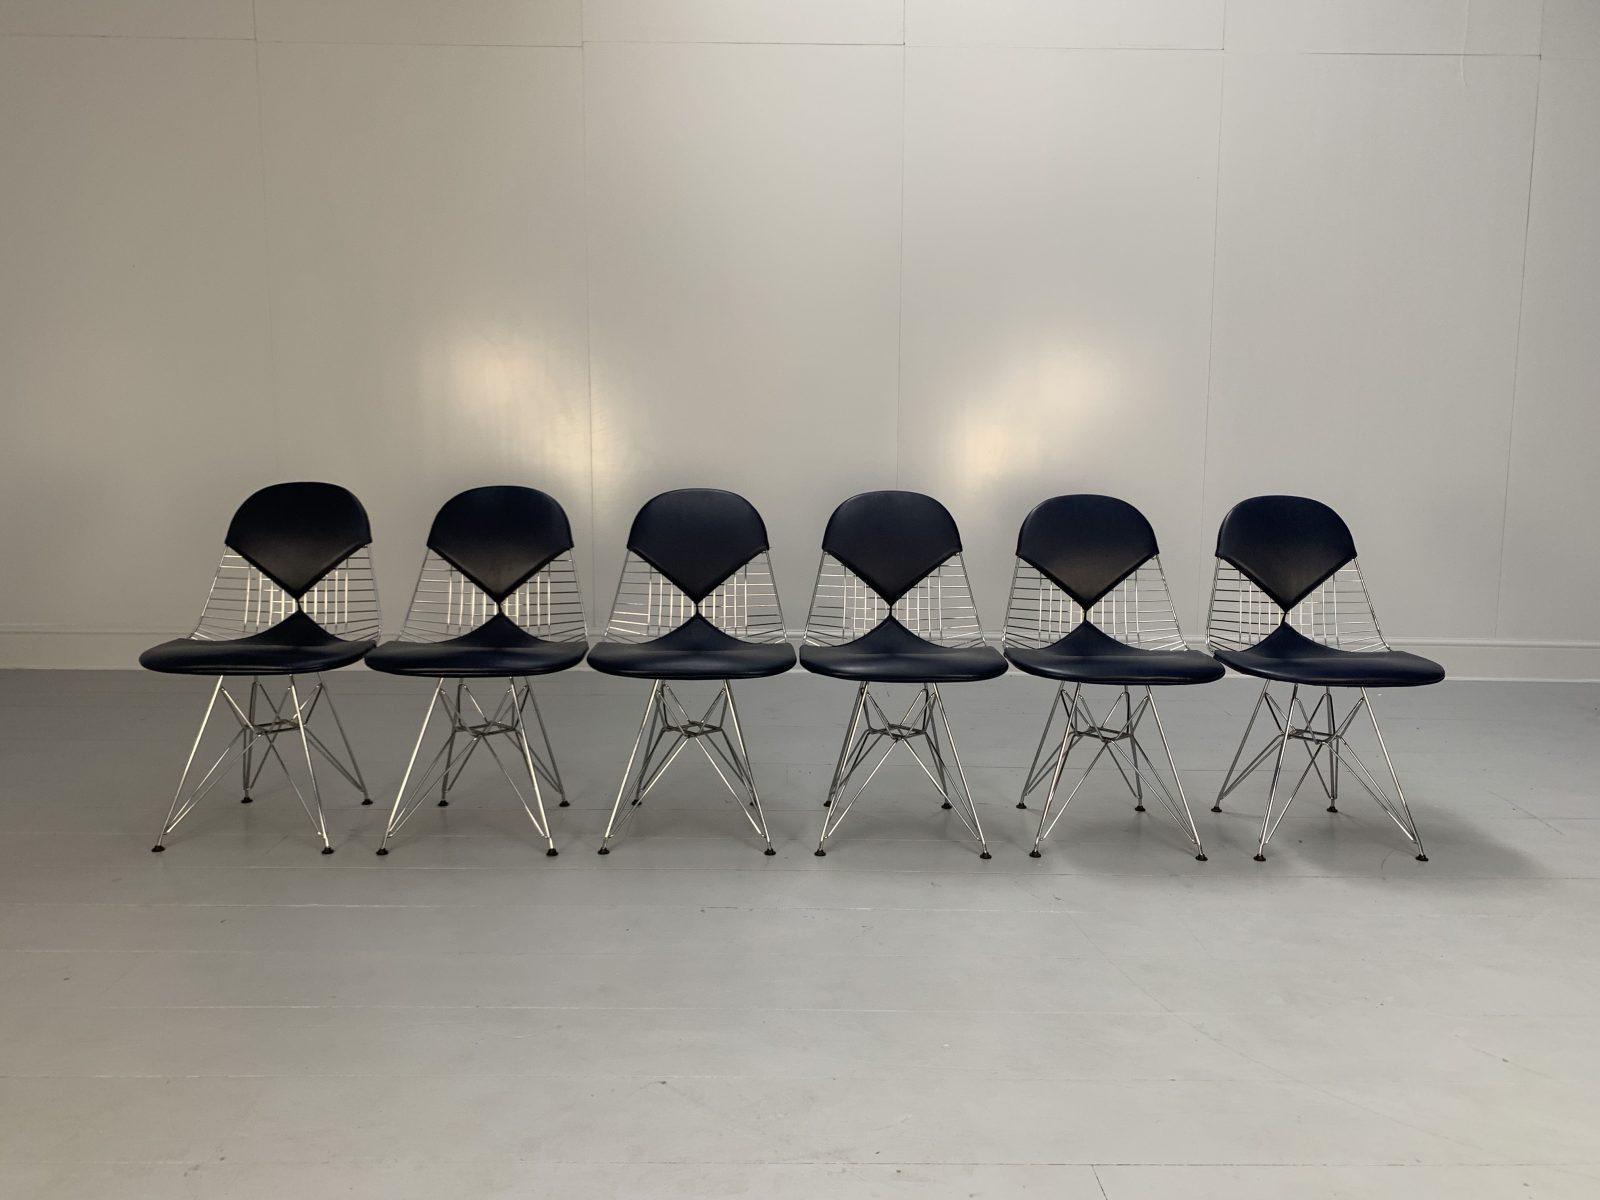 This is a rare suite of 6 of “Eames DKR-2” Chairs in Navy-Blue “Premium” leather from the world-renown Swiss furniture house, Vitra.

In a world of temporary pleasures, Vitra create beautiful furniture that remains a joy forever.

This suite of